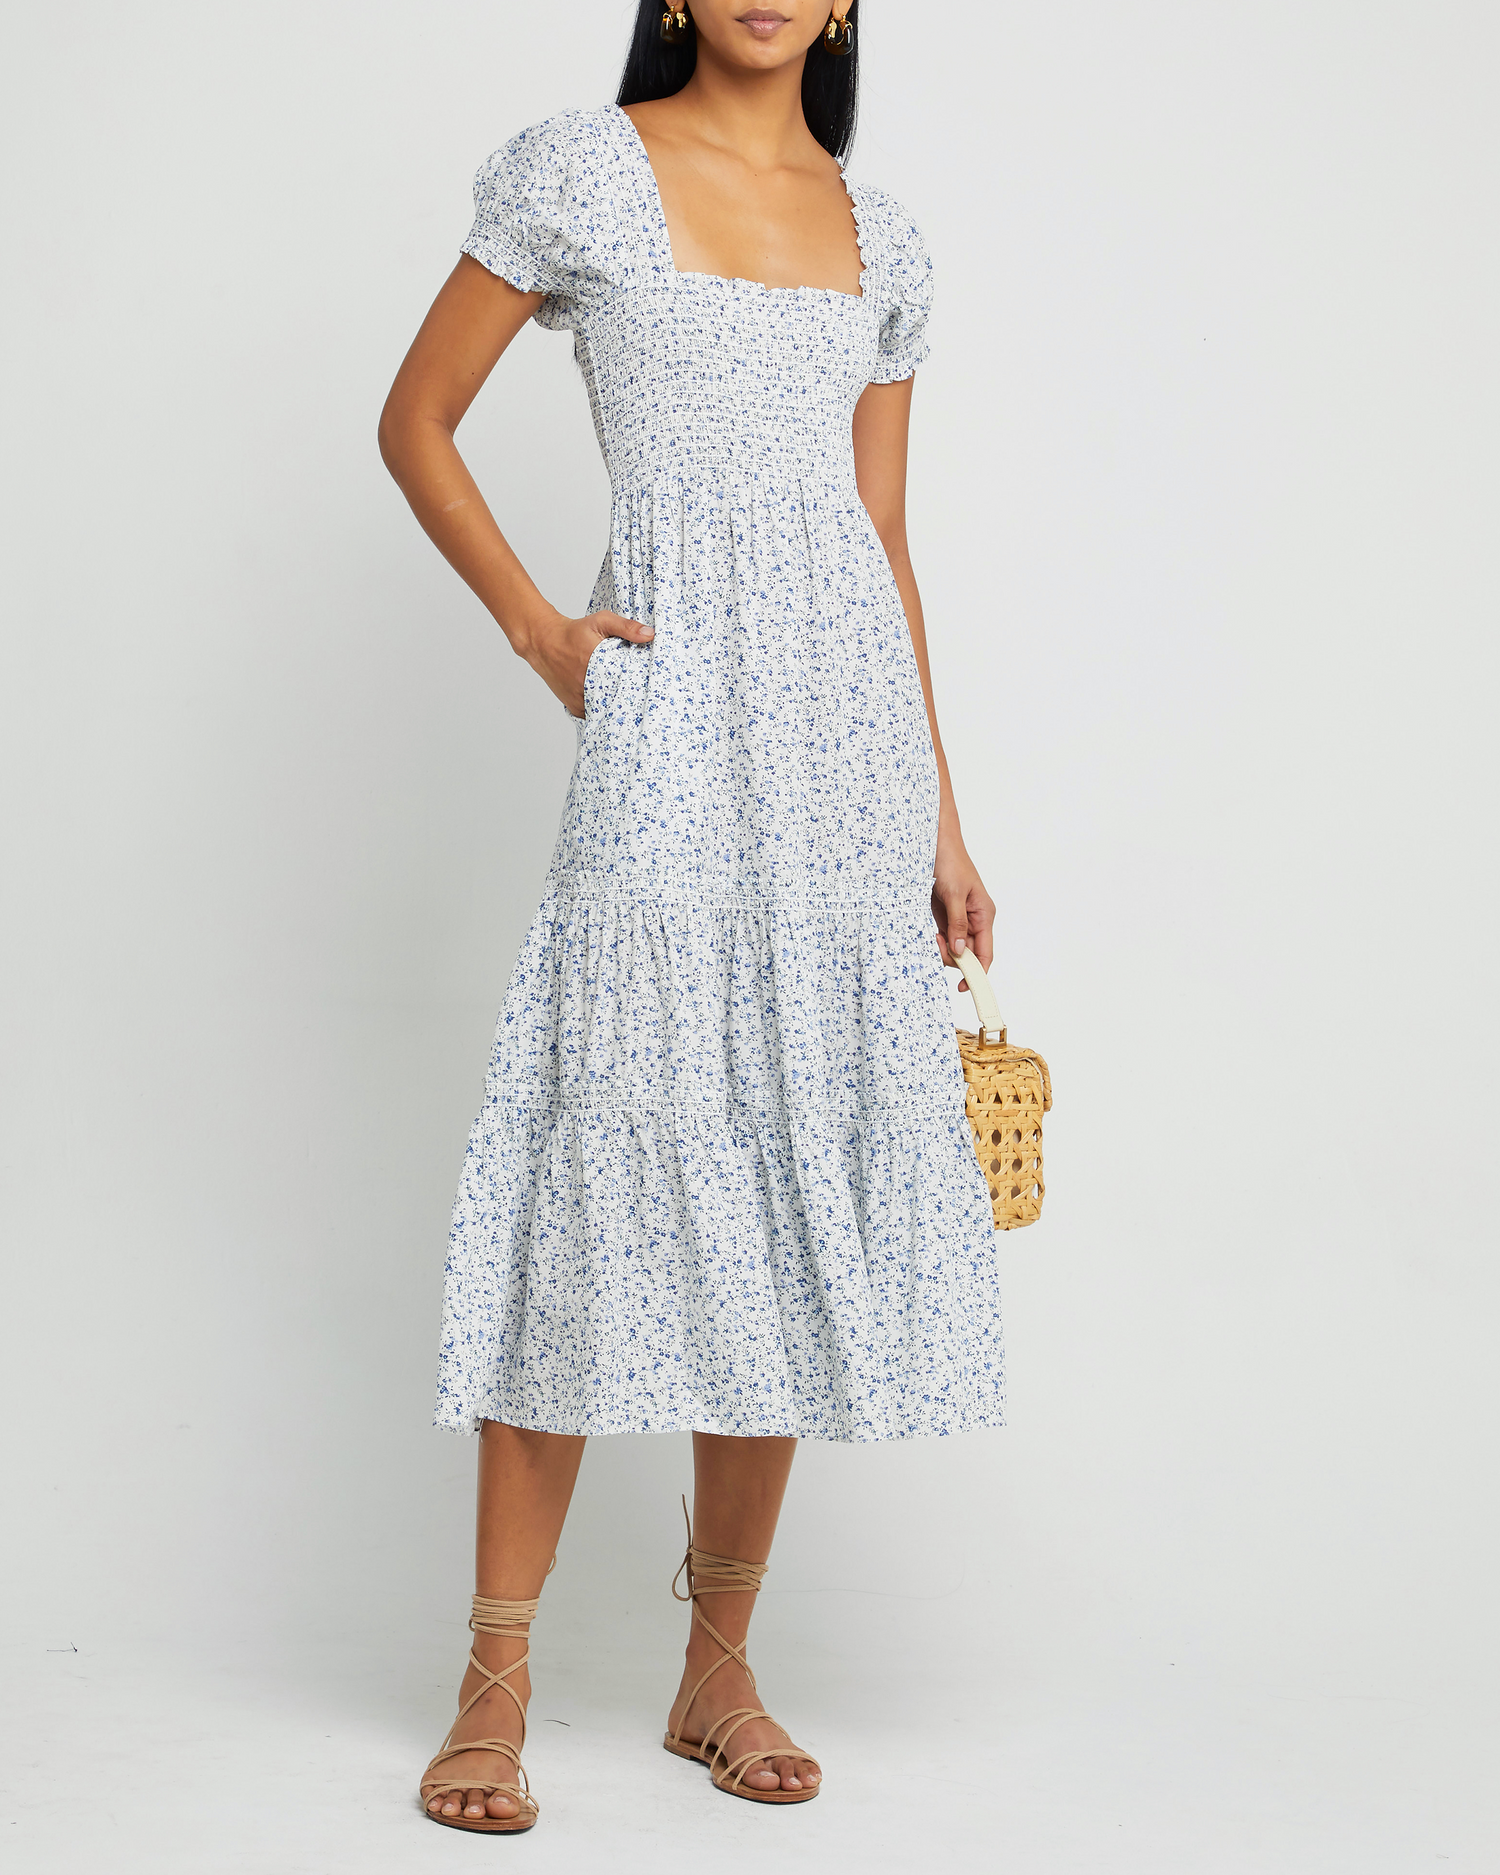 Fifth image of Square Neck Smocked Maxi Dress, a blue maxi dress, smocked, puff sleeves, short sleeves, floral